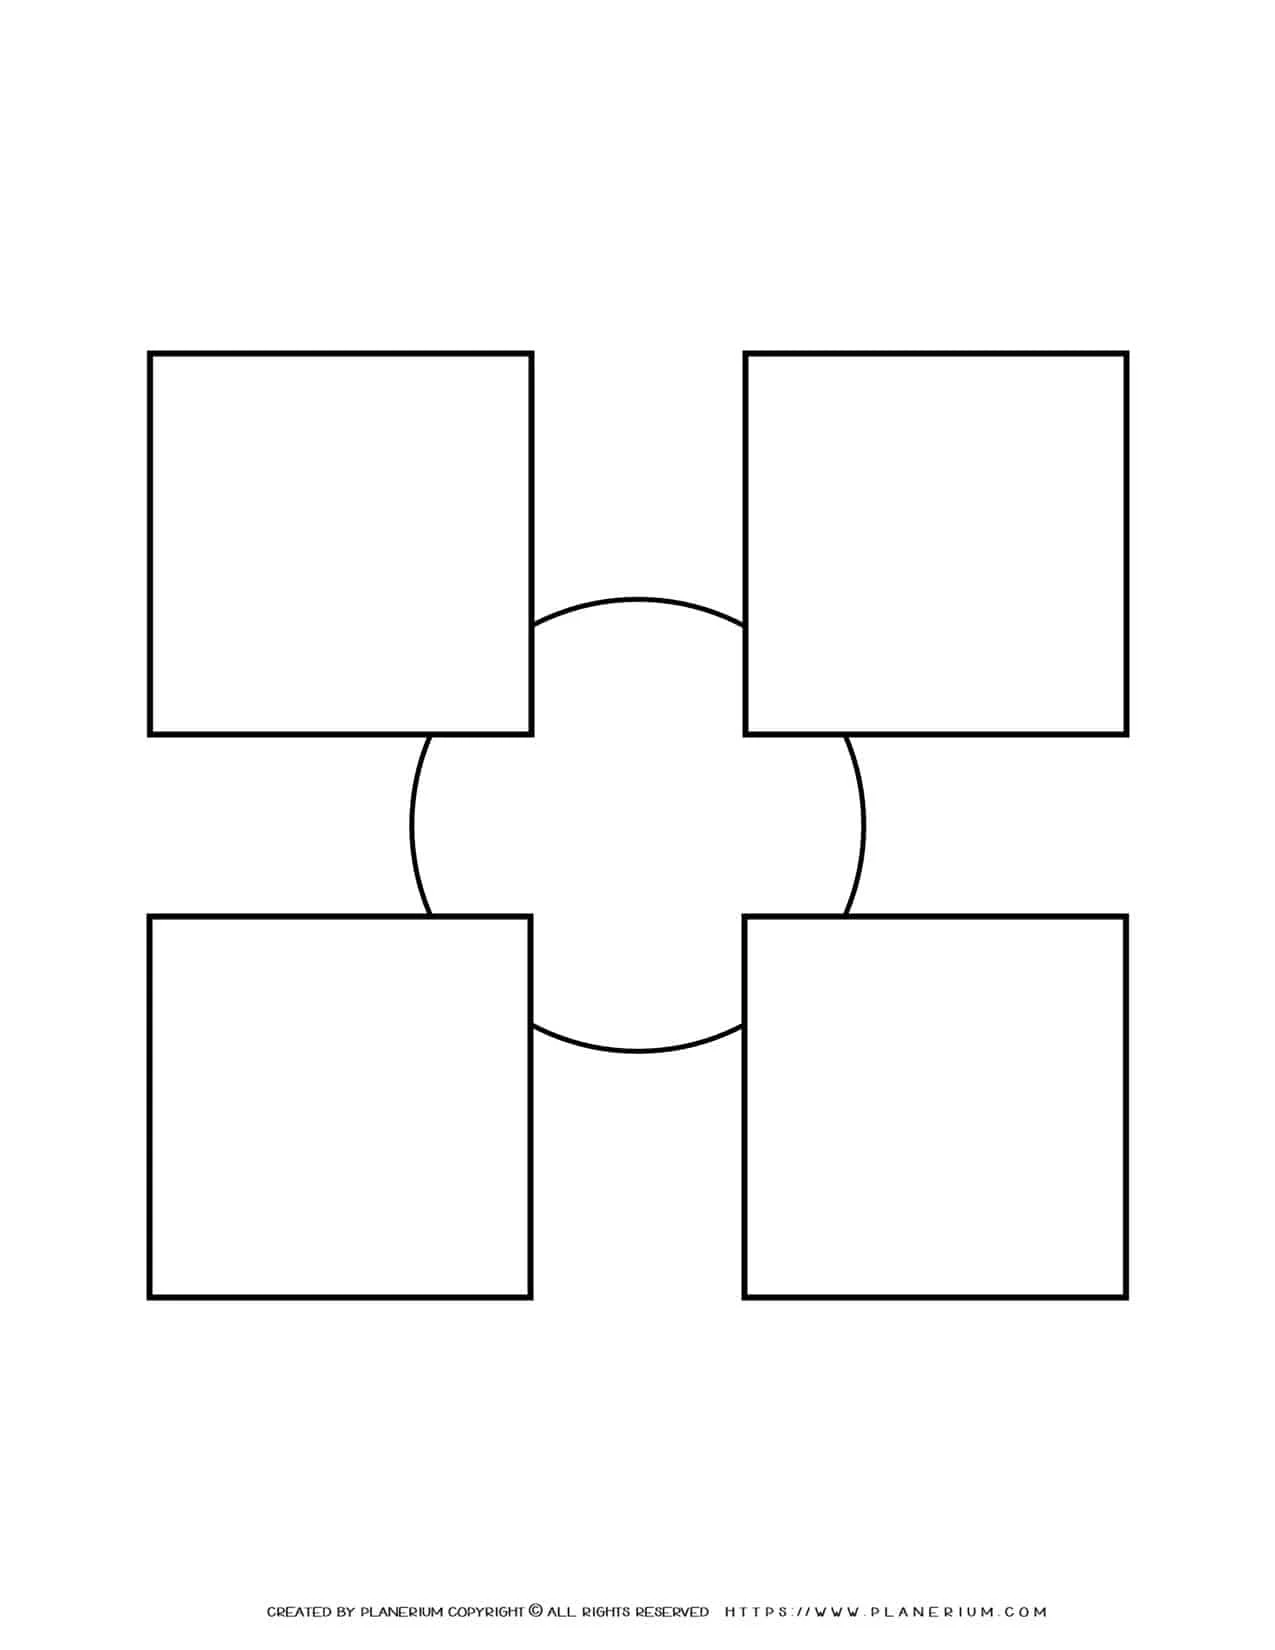 Sequence Chart Template - Four Squares on a Small Circle | Planerium